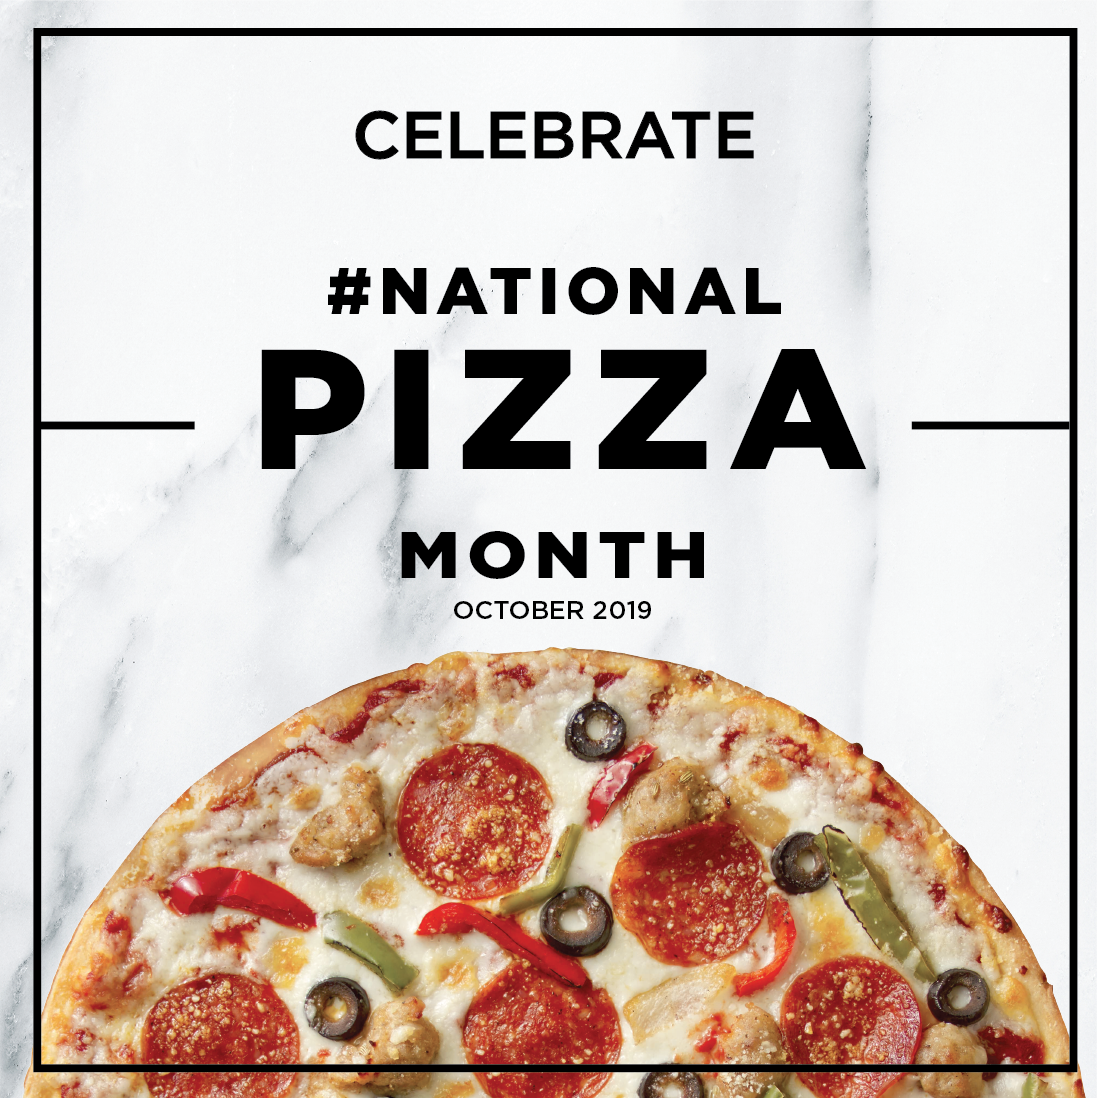 October is National Pizza Month